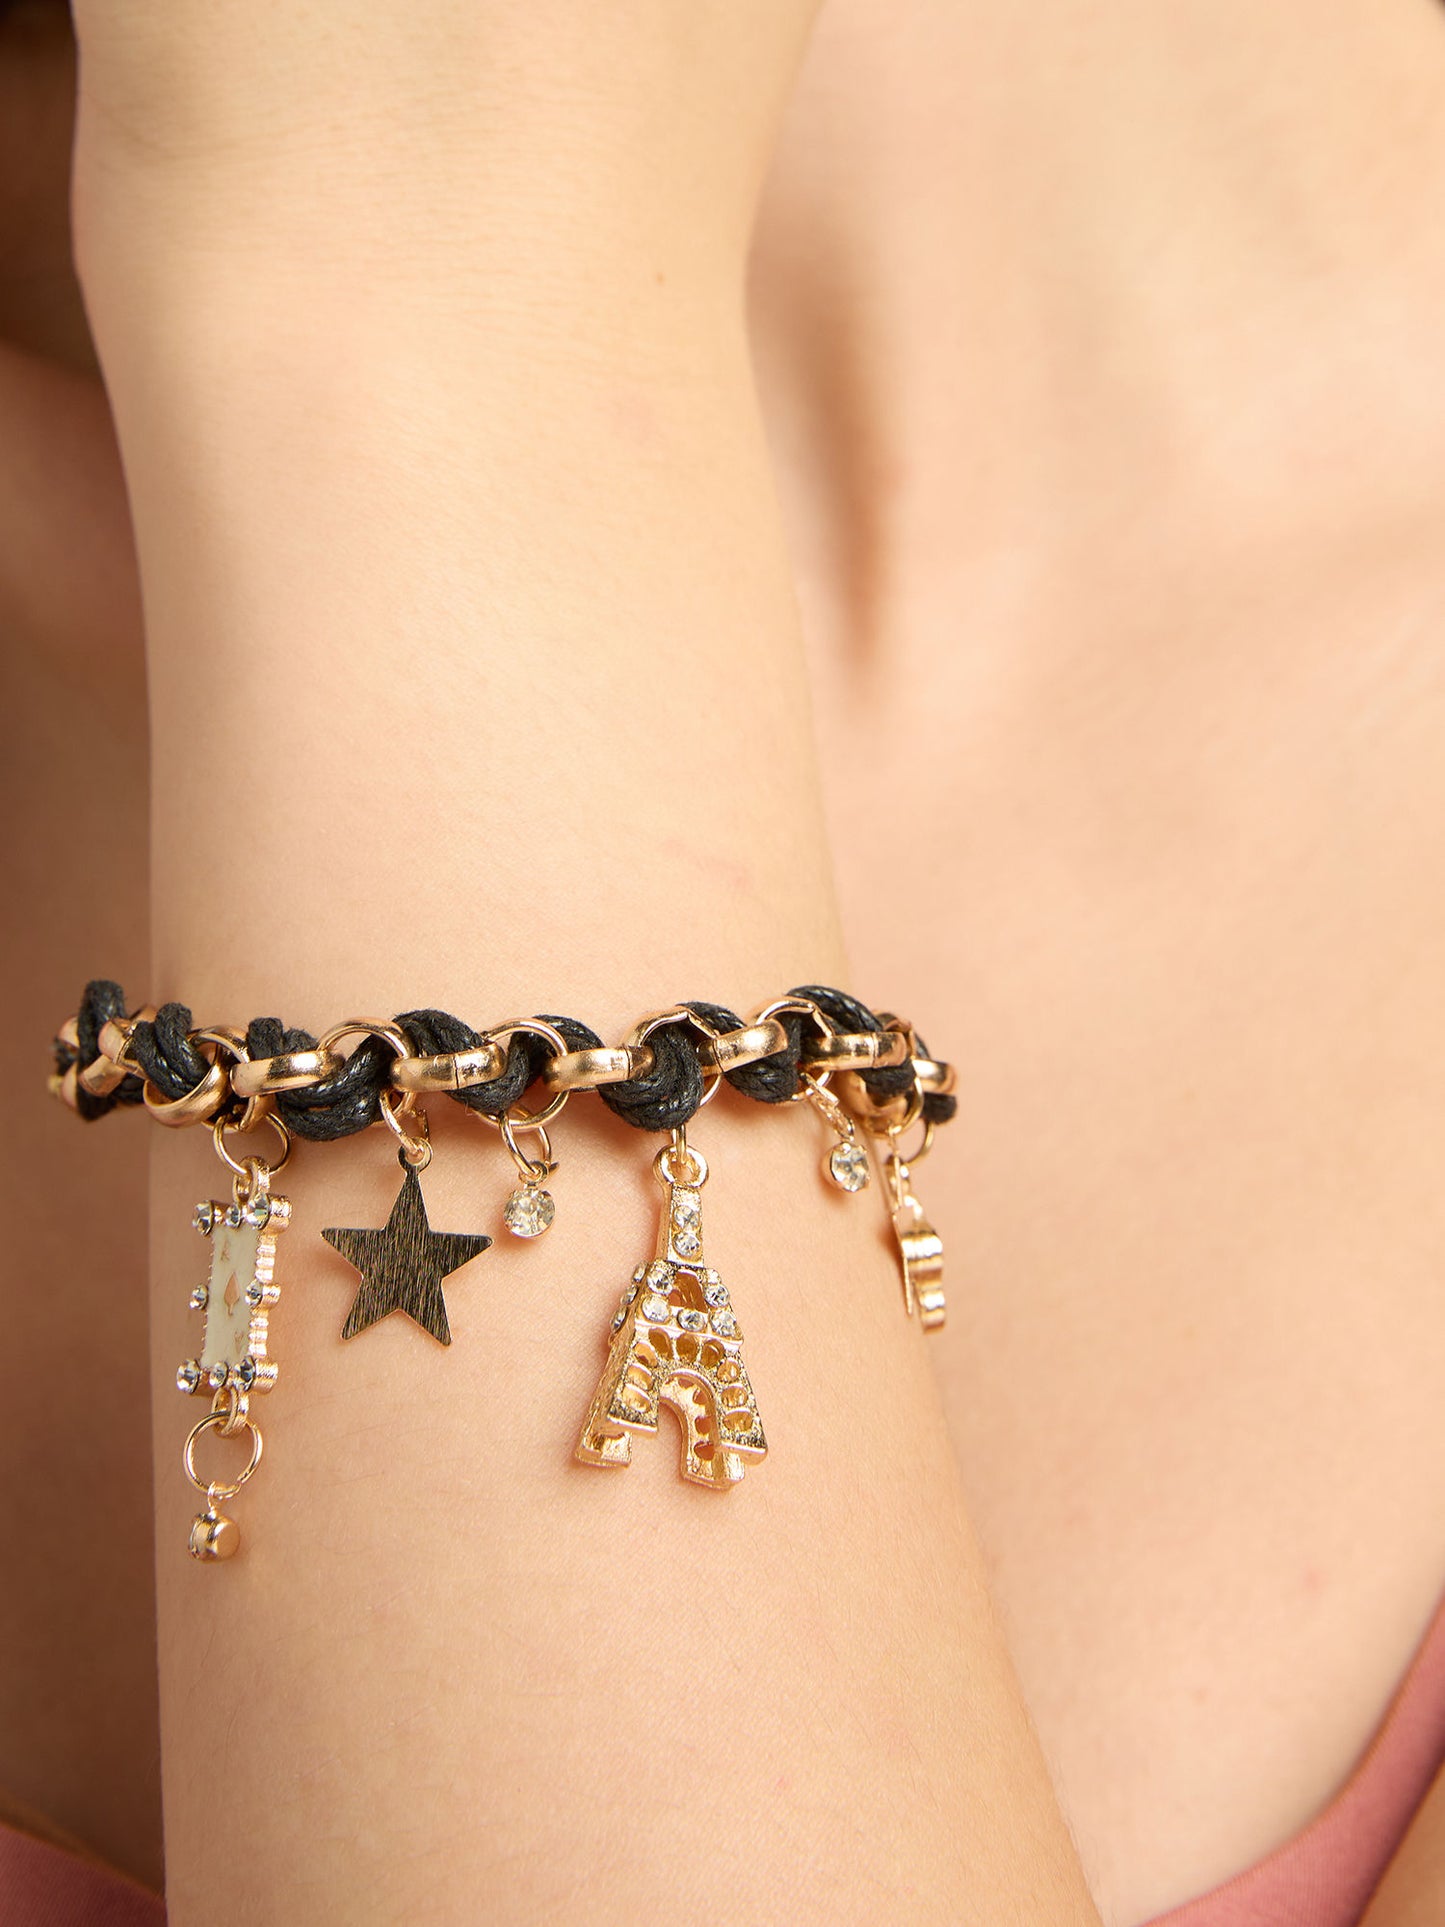 Gold Plated Charm Bracelet with Black Thread